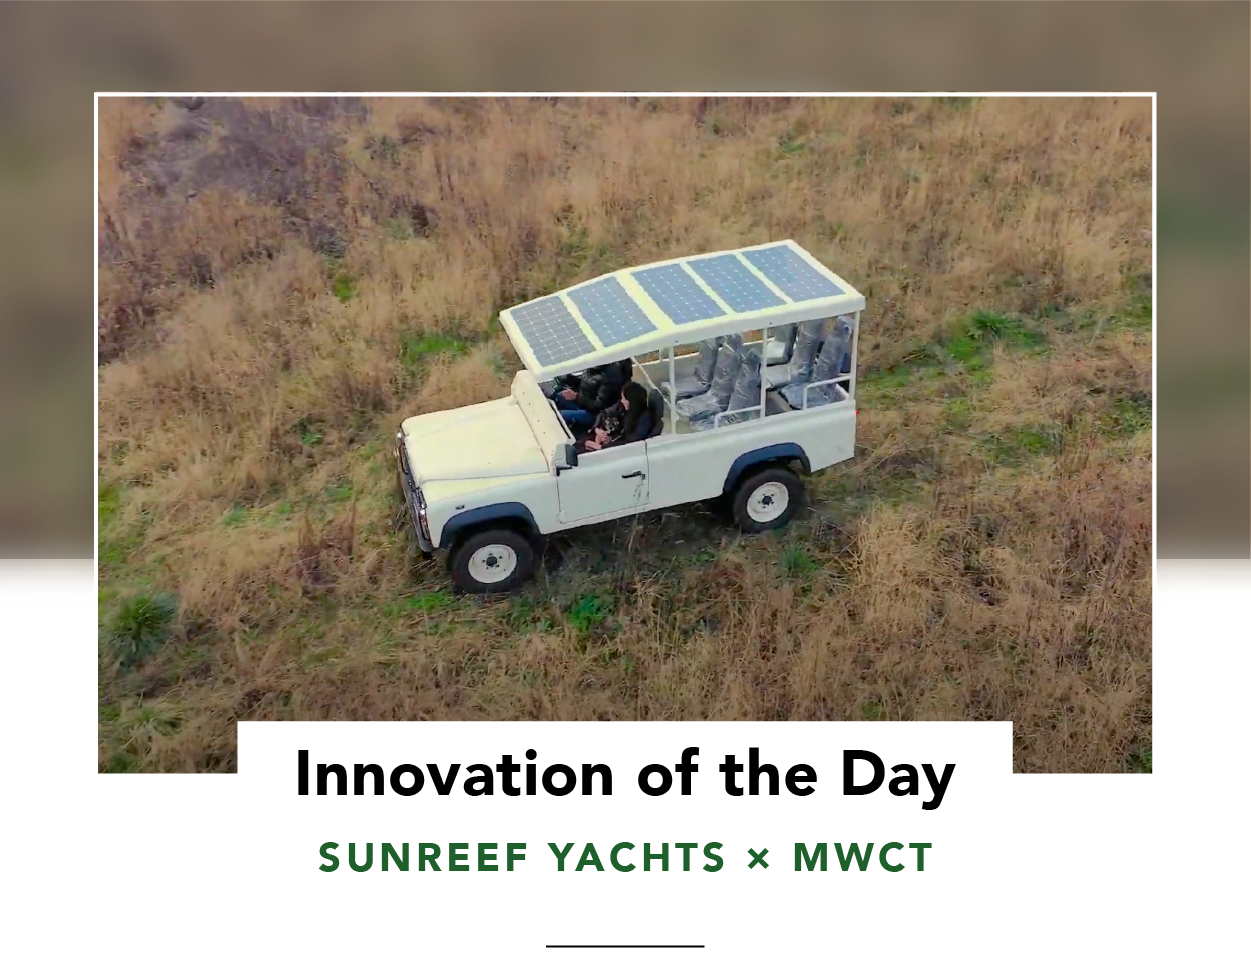 Electric safari vehicle by Sunreef Yachts, viewed from above and showing solar panels on roof